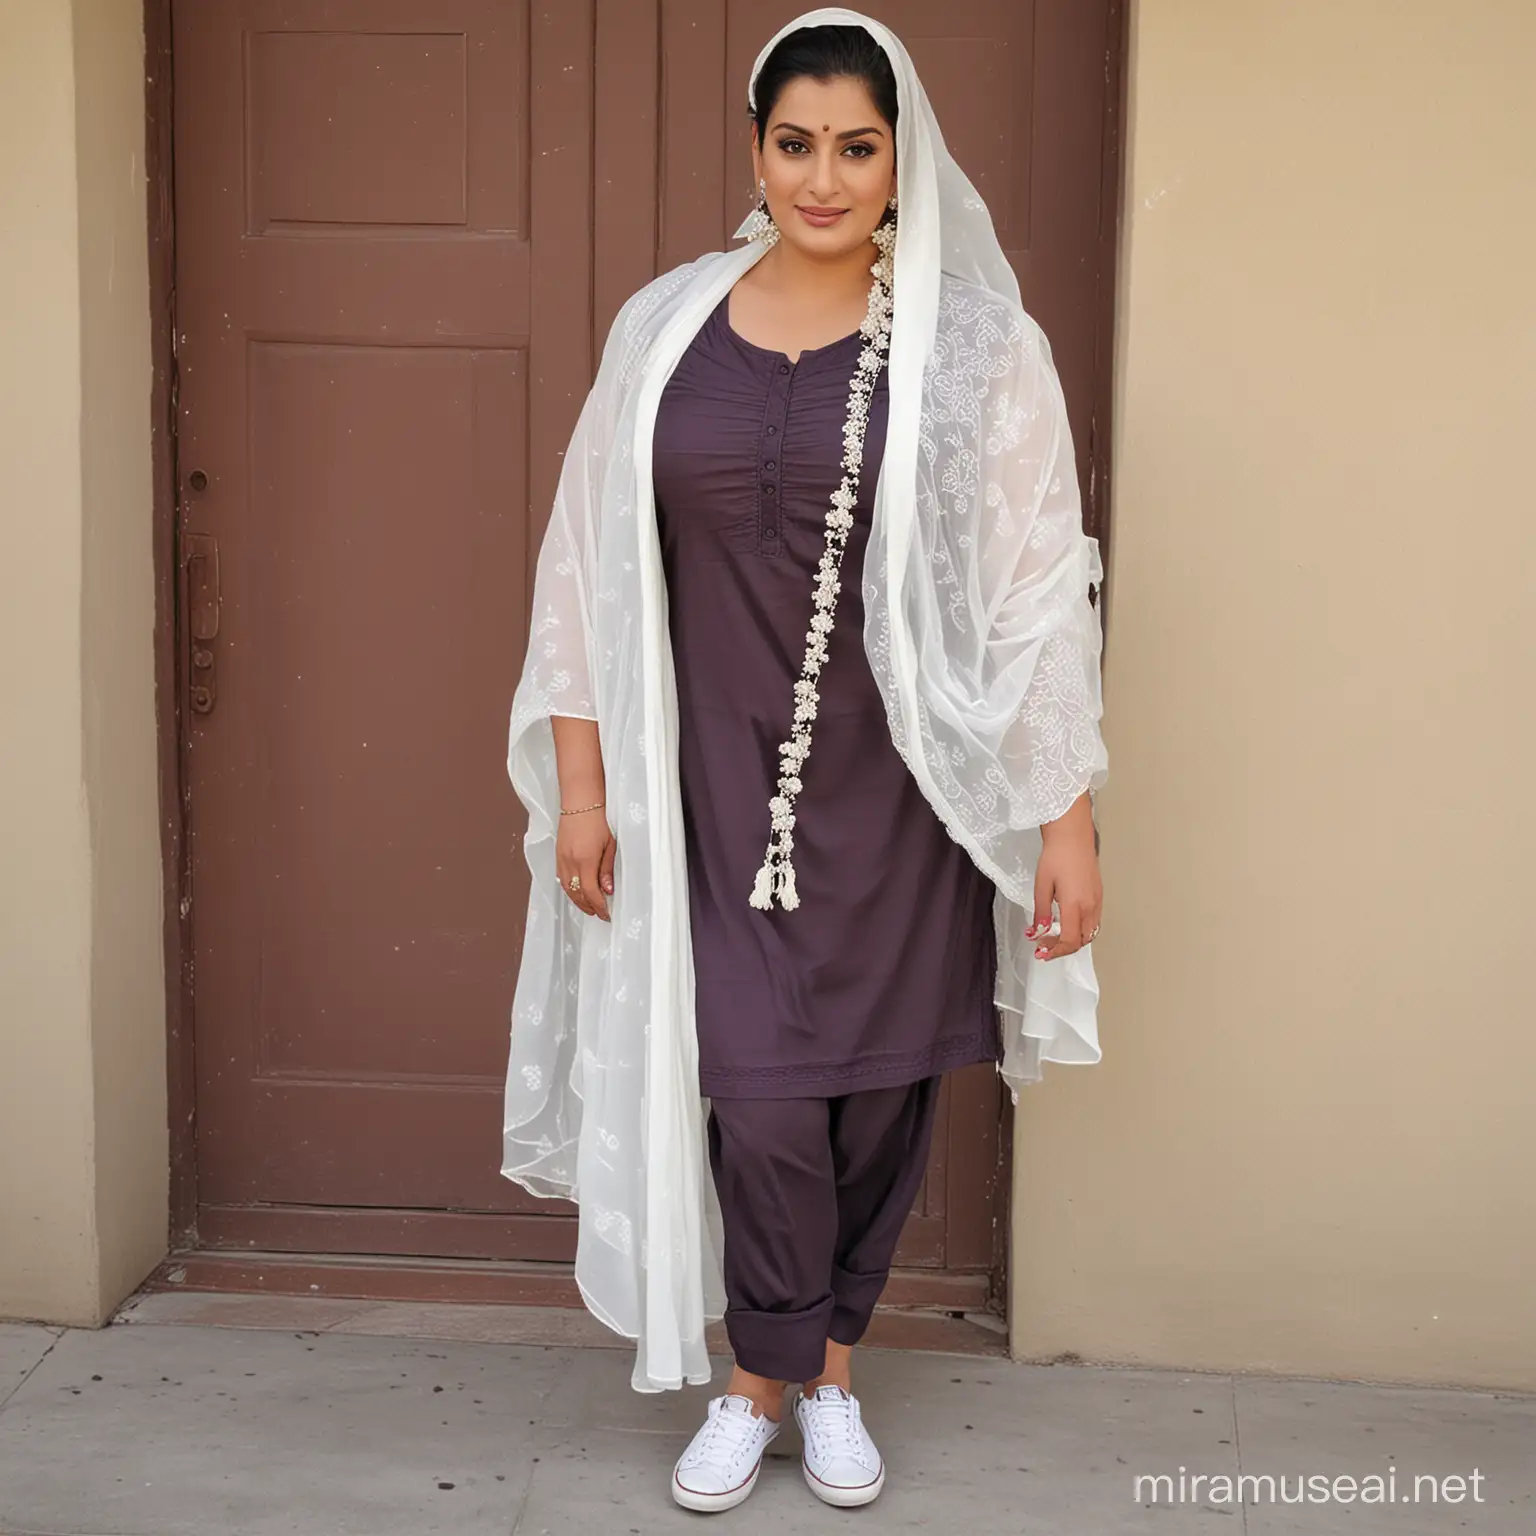 Stylish Punjabi Auntie in Traditional Shalwar Kameez and Converse Ballerina Shoes